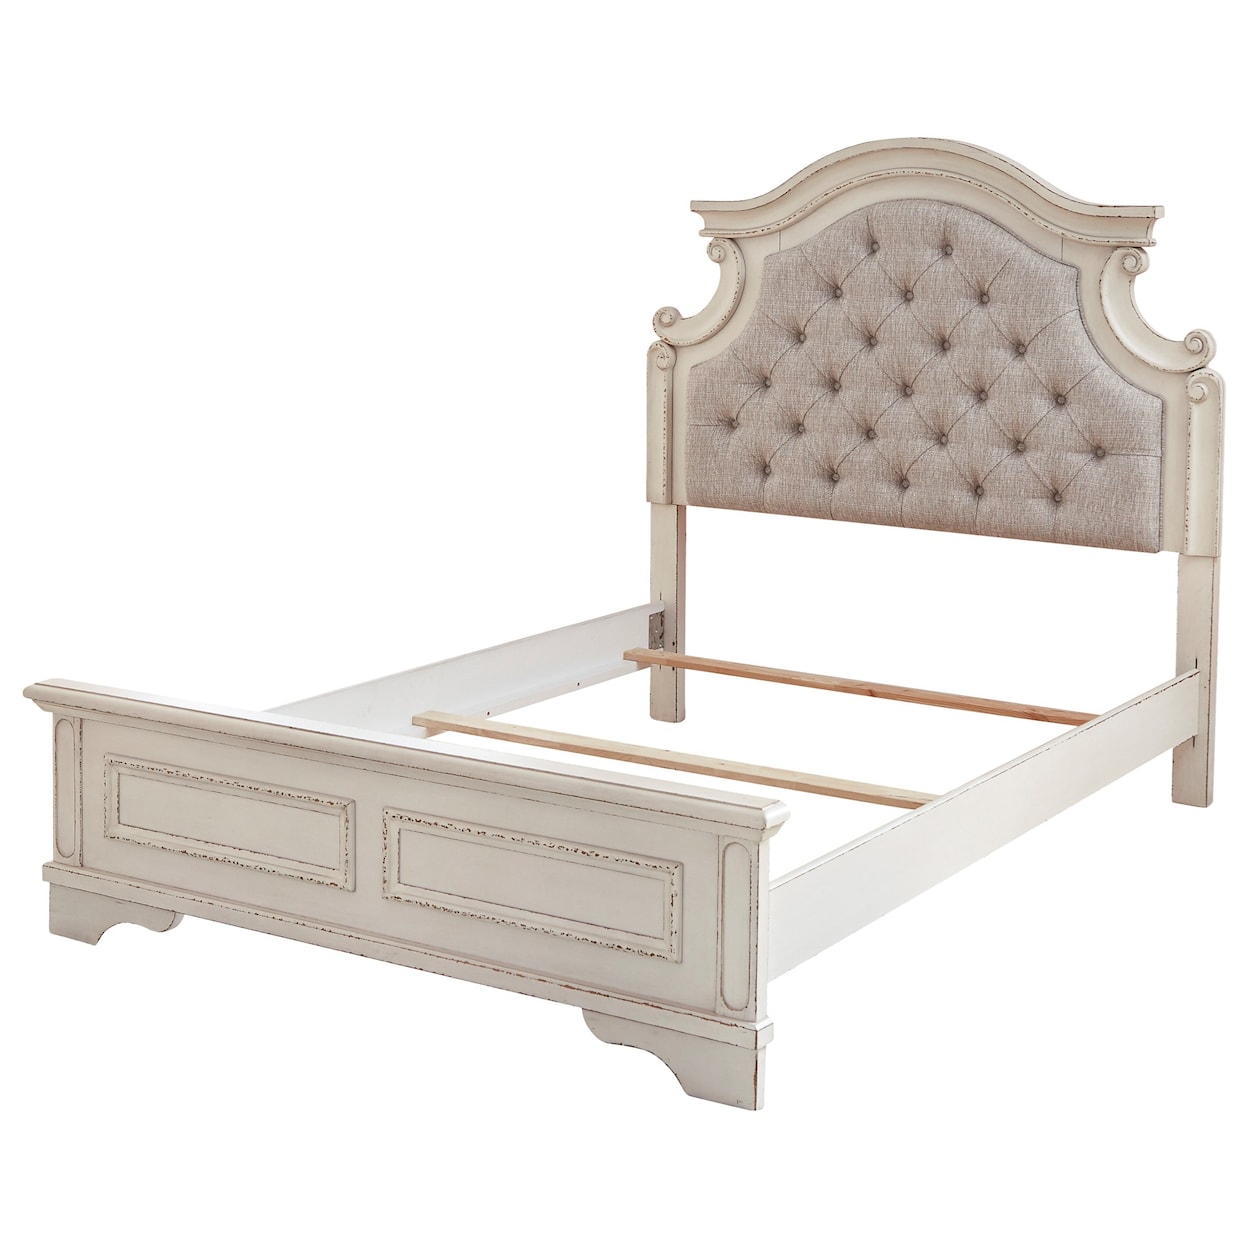 Signature Design by Ashley Realyn Full Upholstered Panel Bed